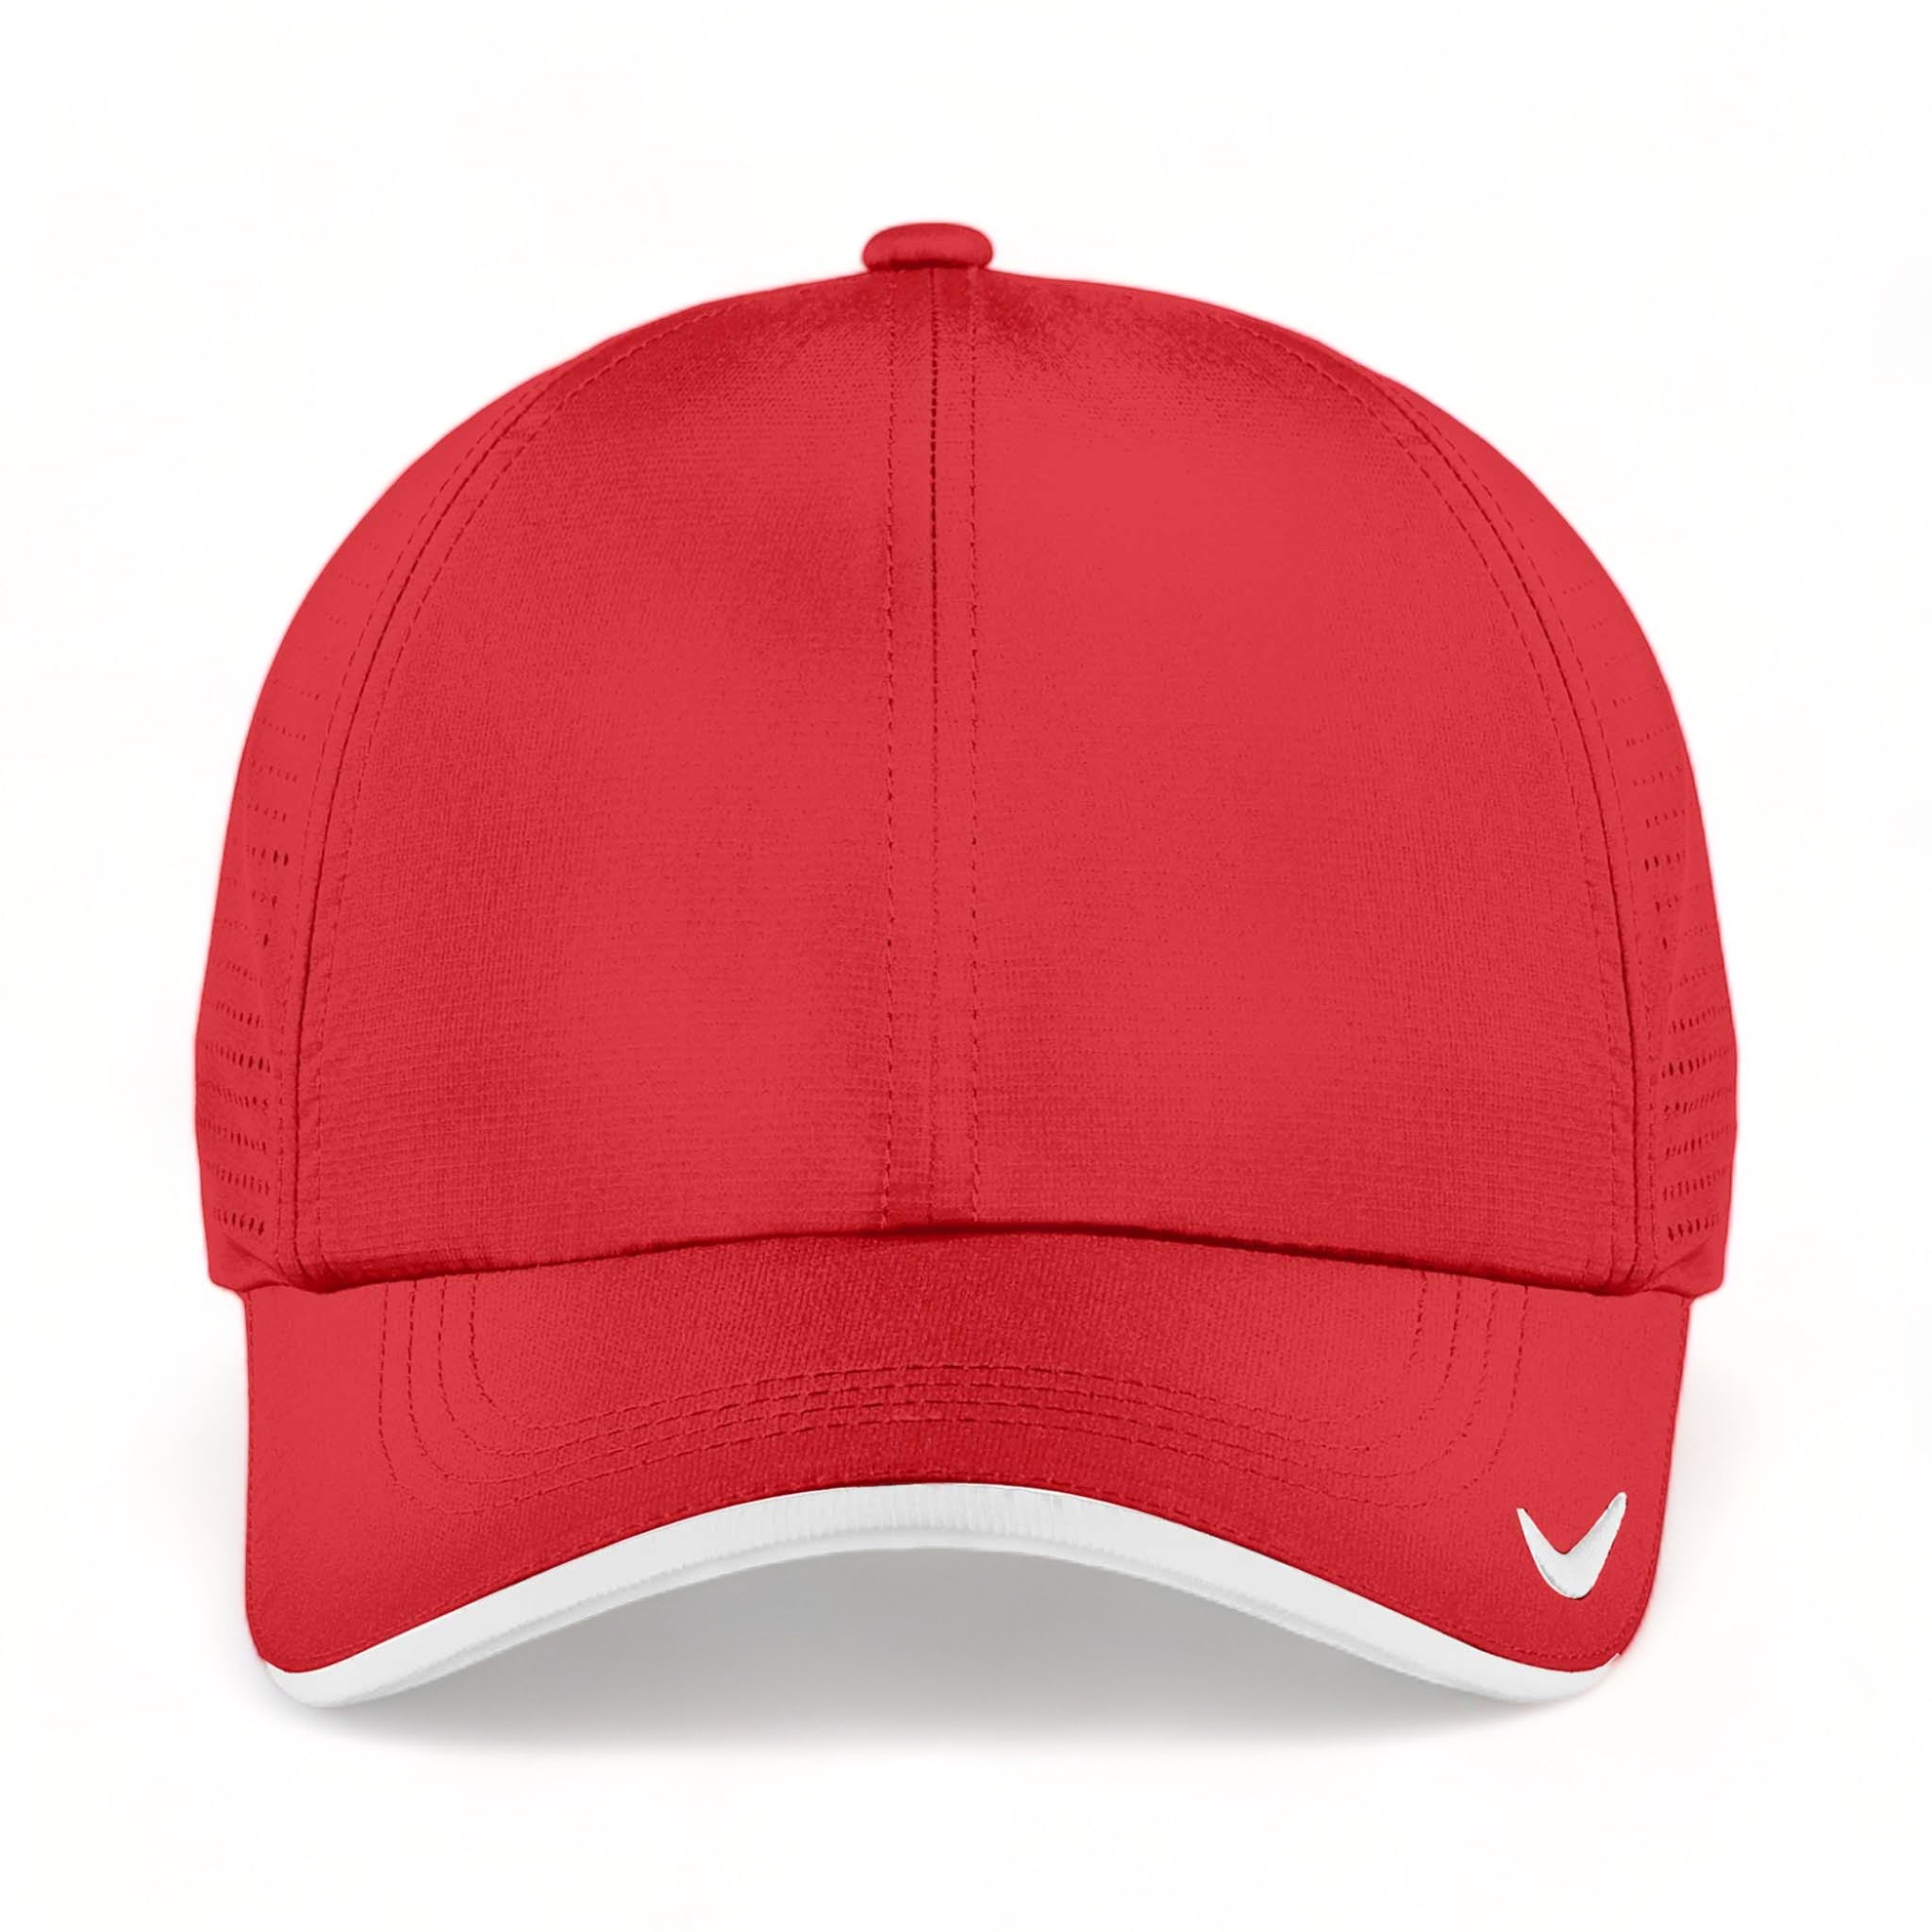 Front view of Nike NKFB6445 custom hat in university red and white